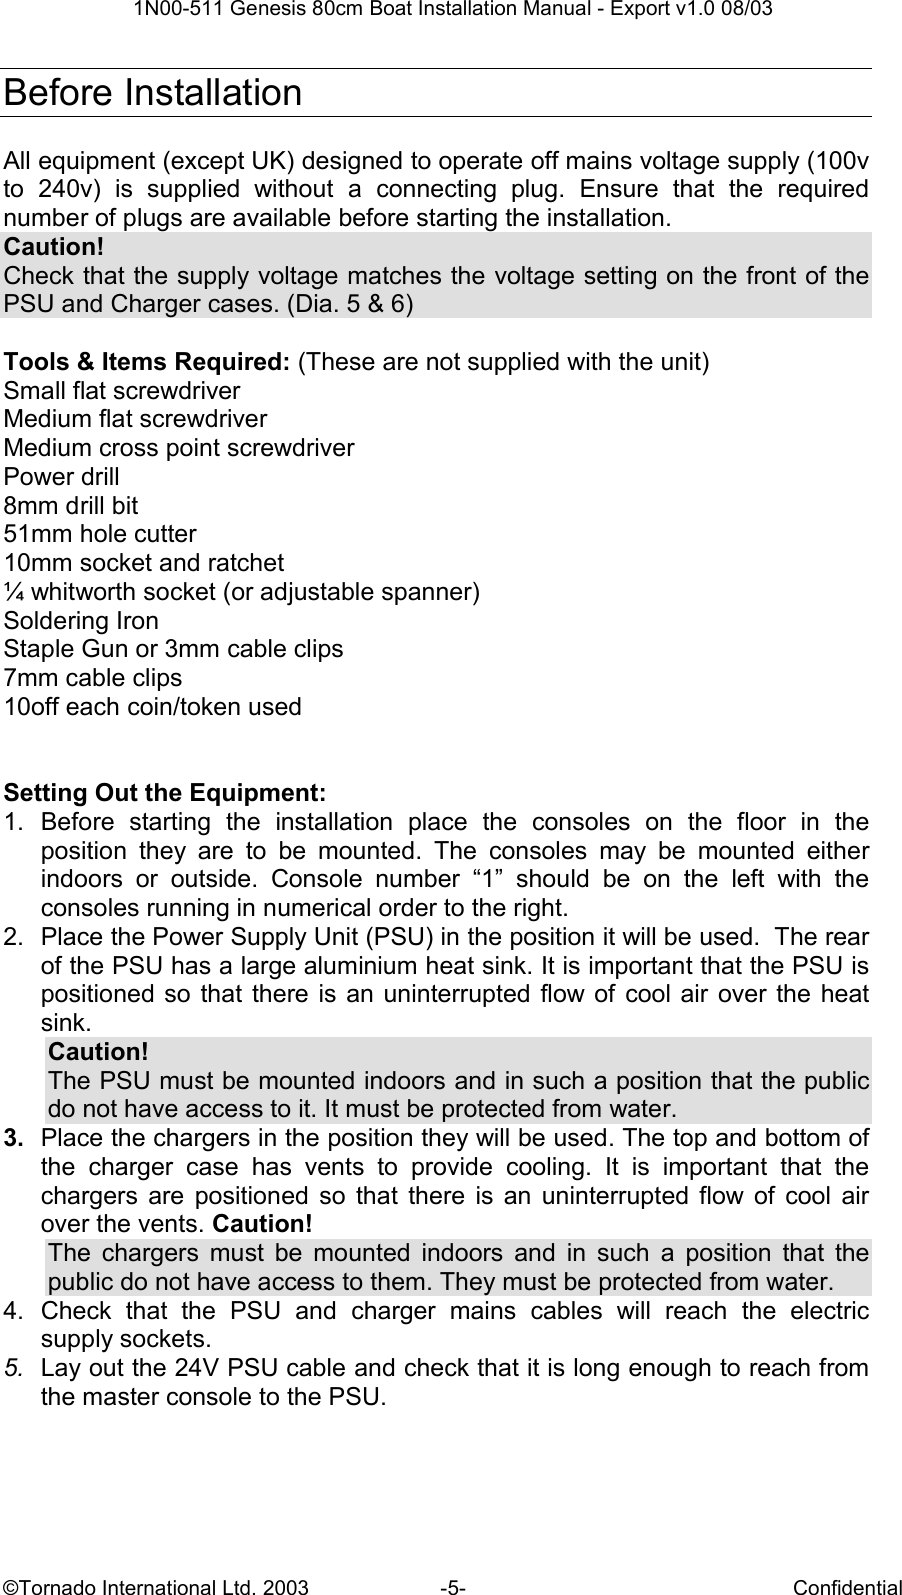  1N00-511 Genesis 80cm Boat Installation Manual - Export v1.0 08/03 ©Tornado International Ltd. 2003  -5-  Confidential  Before Installation  All equipment (except UK) designed to operate off mains voltage supply (100v to  240v)  is  supplied  without  a  connecting  plug.  Ensure  that  the  required number of plugs are available before starting the installation.  Caution! Check that the supply voltage matches the voltage setting on the front of the PSU and Charger cases. (Dia. 5 &amp; 6)  Tools &amp; Items Required: (These are not supplied with the unit) Small flat screwdriver Medium flat screwdriver Medium cross point screwdriver Power drill 8mm drill bit 51mm hole cutter 10mm socket and ratchet ¼ whitworth socket (or adjustable spanner) Soldering Iron Staple Gun or 3mm cable clips 7mm cable clips 10off each coin/token used   Setting Out the Equipment: 1.  Before  starting  the  installation  place  the  consoles  on  the  floor  in  the position  they  are  to  be  mounted.  The  consoles  may  be  mounted  either indoors  or  outside.  Console  number  “1”  should  be  on  the  left  with  the consoles running in numerical order to the right. 2.  Place the Power Supply Unit (PSU) in the position it will be used.  The rear of the PSU has a large aluminium heat sink. It is important that the PSU is positioned so that there  is an uninterrupted flow of cool air over the  heat sink. Caution! The PSU must be mounted indoors and in such a position that the public do not have access to it. It must be protected from water. 3.  Place the chargers in the position they will be used. The top and bottom of the  charger  case  has  vents  to  provide  cooling.  It  is  important  that  the chargers  are  positioned  so  that  there  is  an  uninterrupted flow  of  cool  air over the vents. Caution! The  chargers  must  be  mounted  indoors  and  in  such  a  position  that  the public do not have access to them. They must be protected from water. 4.  Check  that  the  PSU  and  charger  mains  cables  will  reach  the  electric supply sockets. 5.  Lay out the 24V PSU cable and check that it is long enough to reach from the master console to the PSU. 